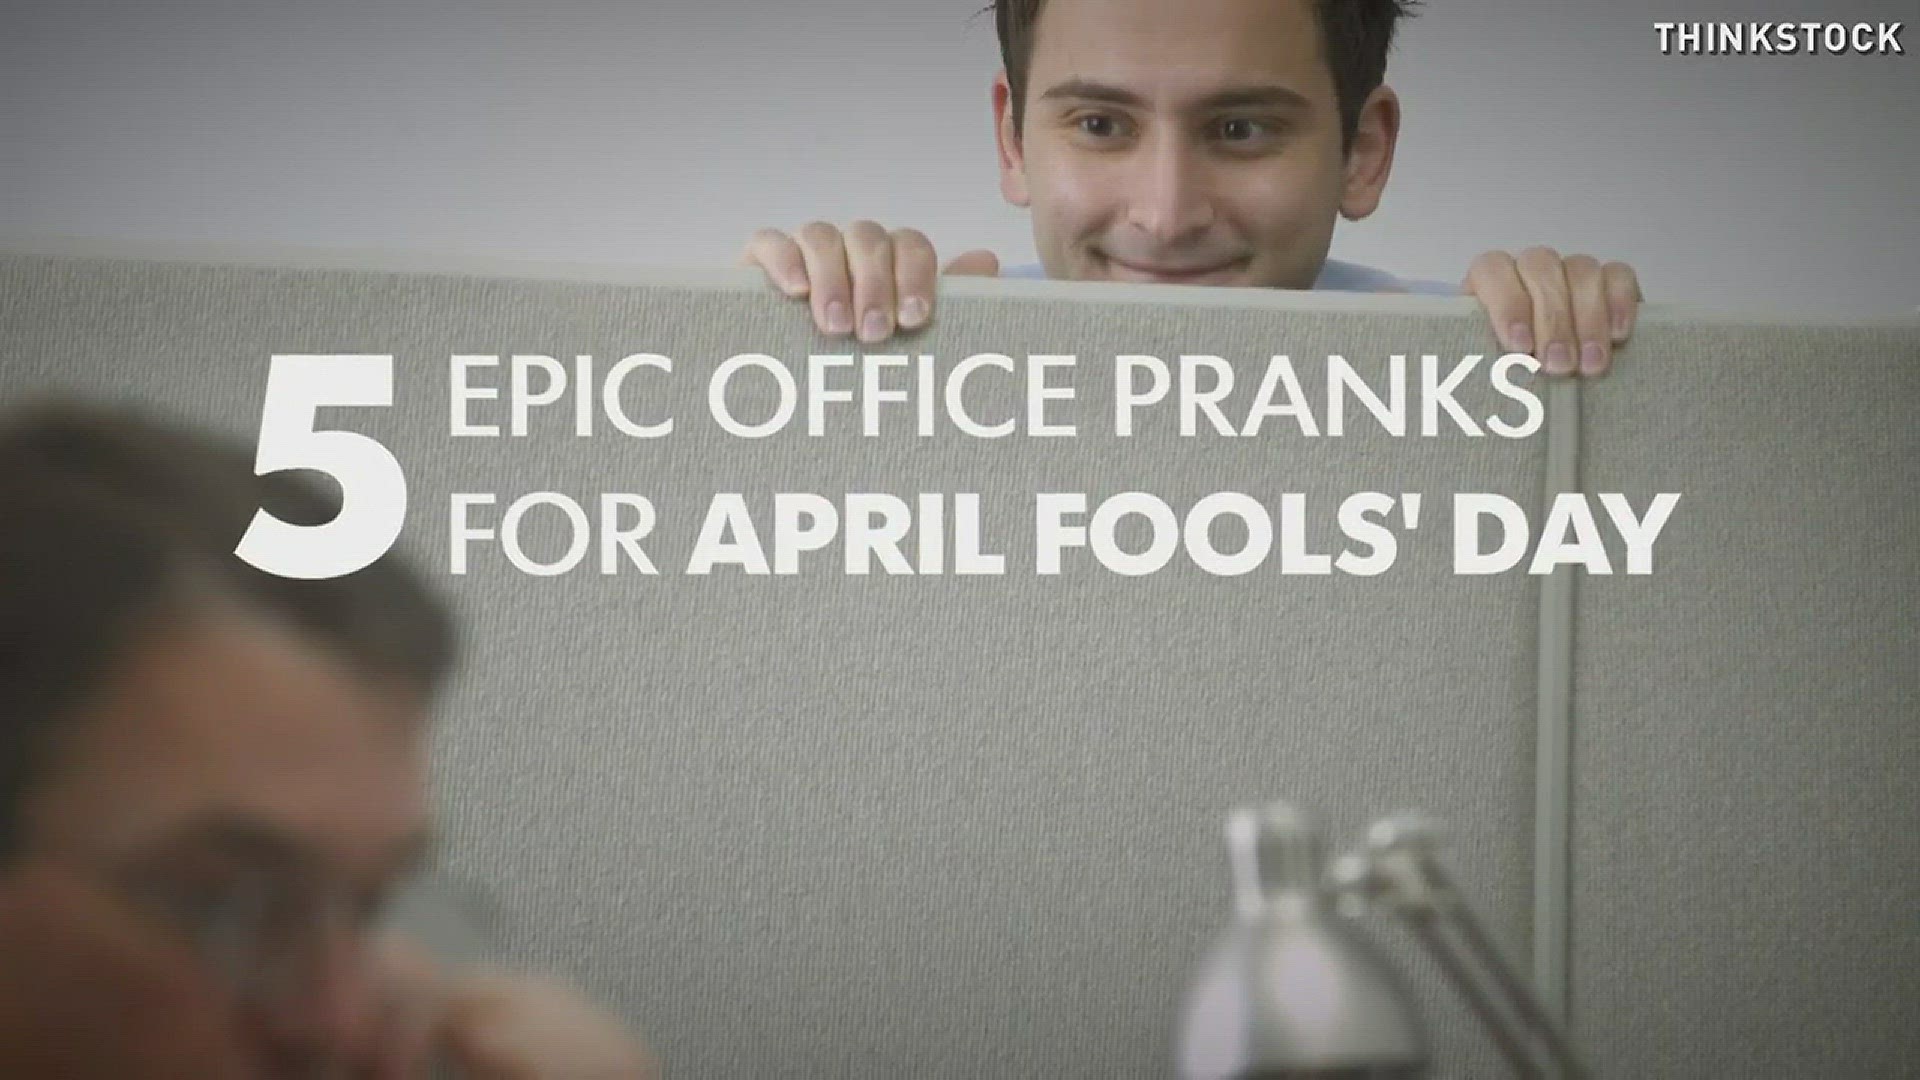 Get the upper hand on your co-workers this April Fools' Day before they prank you.